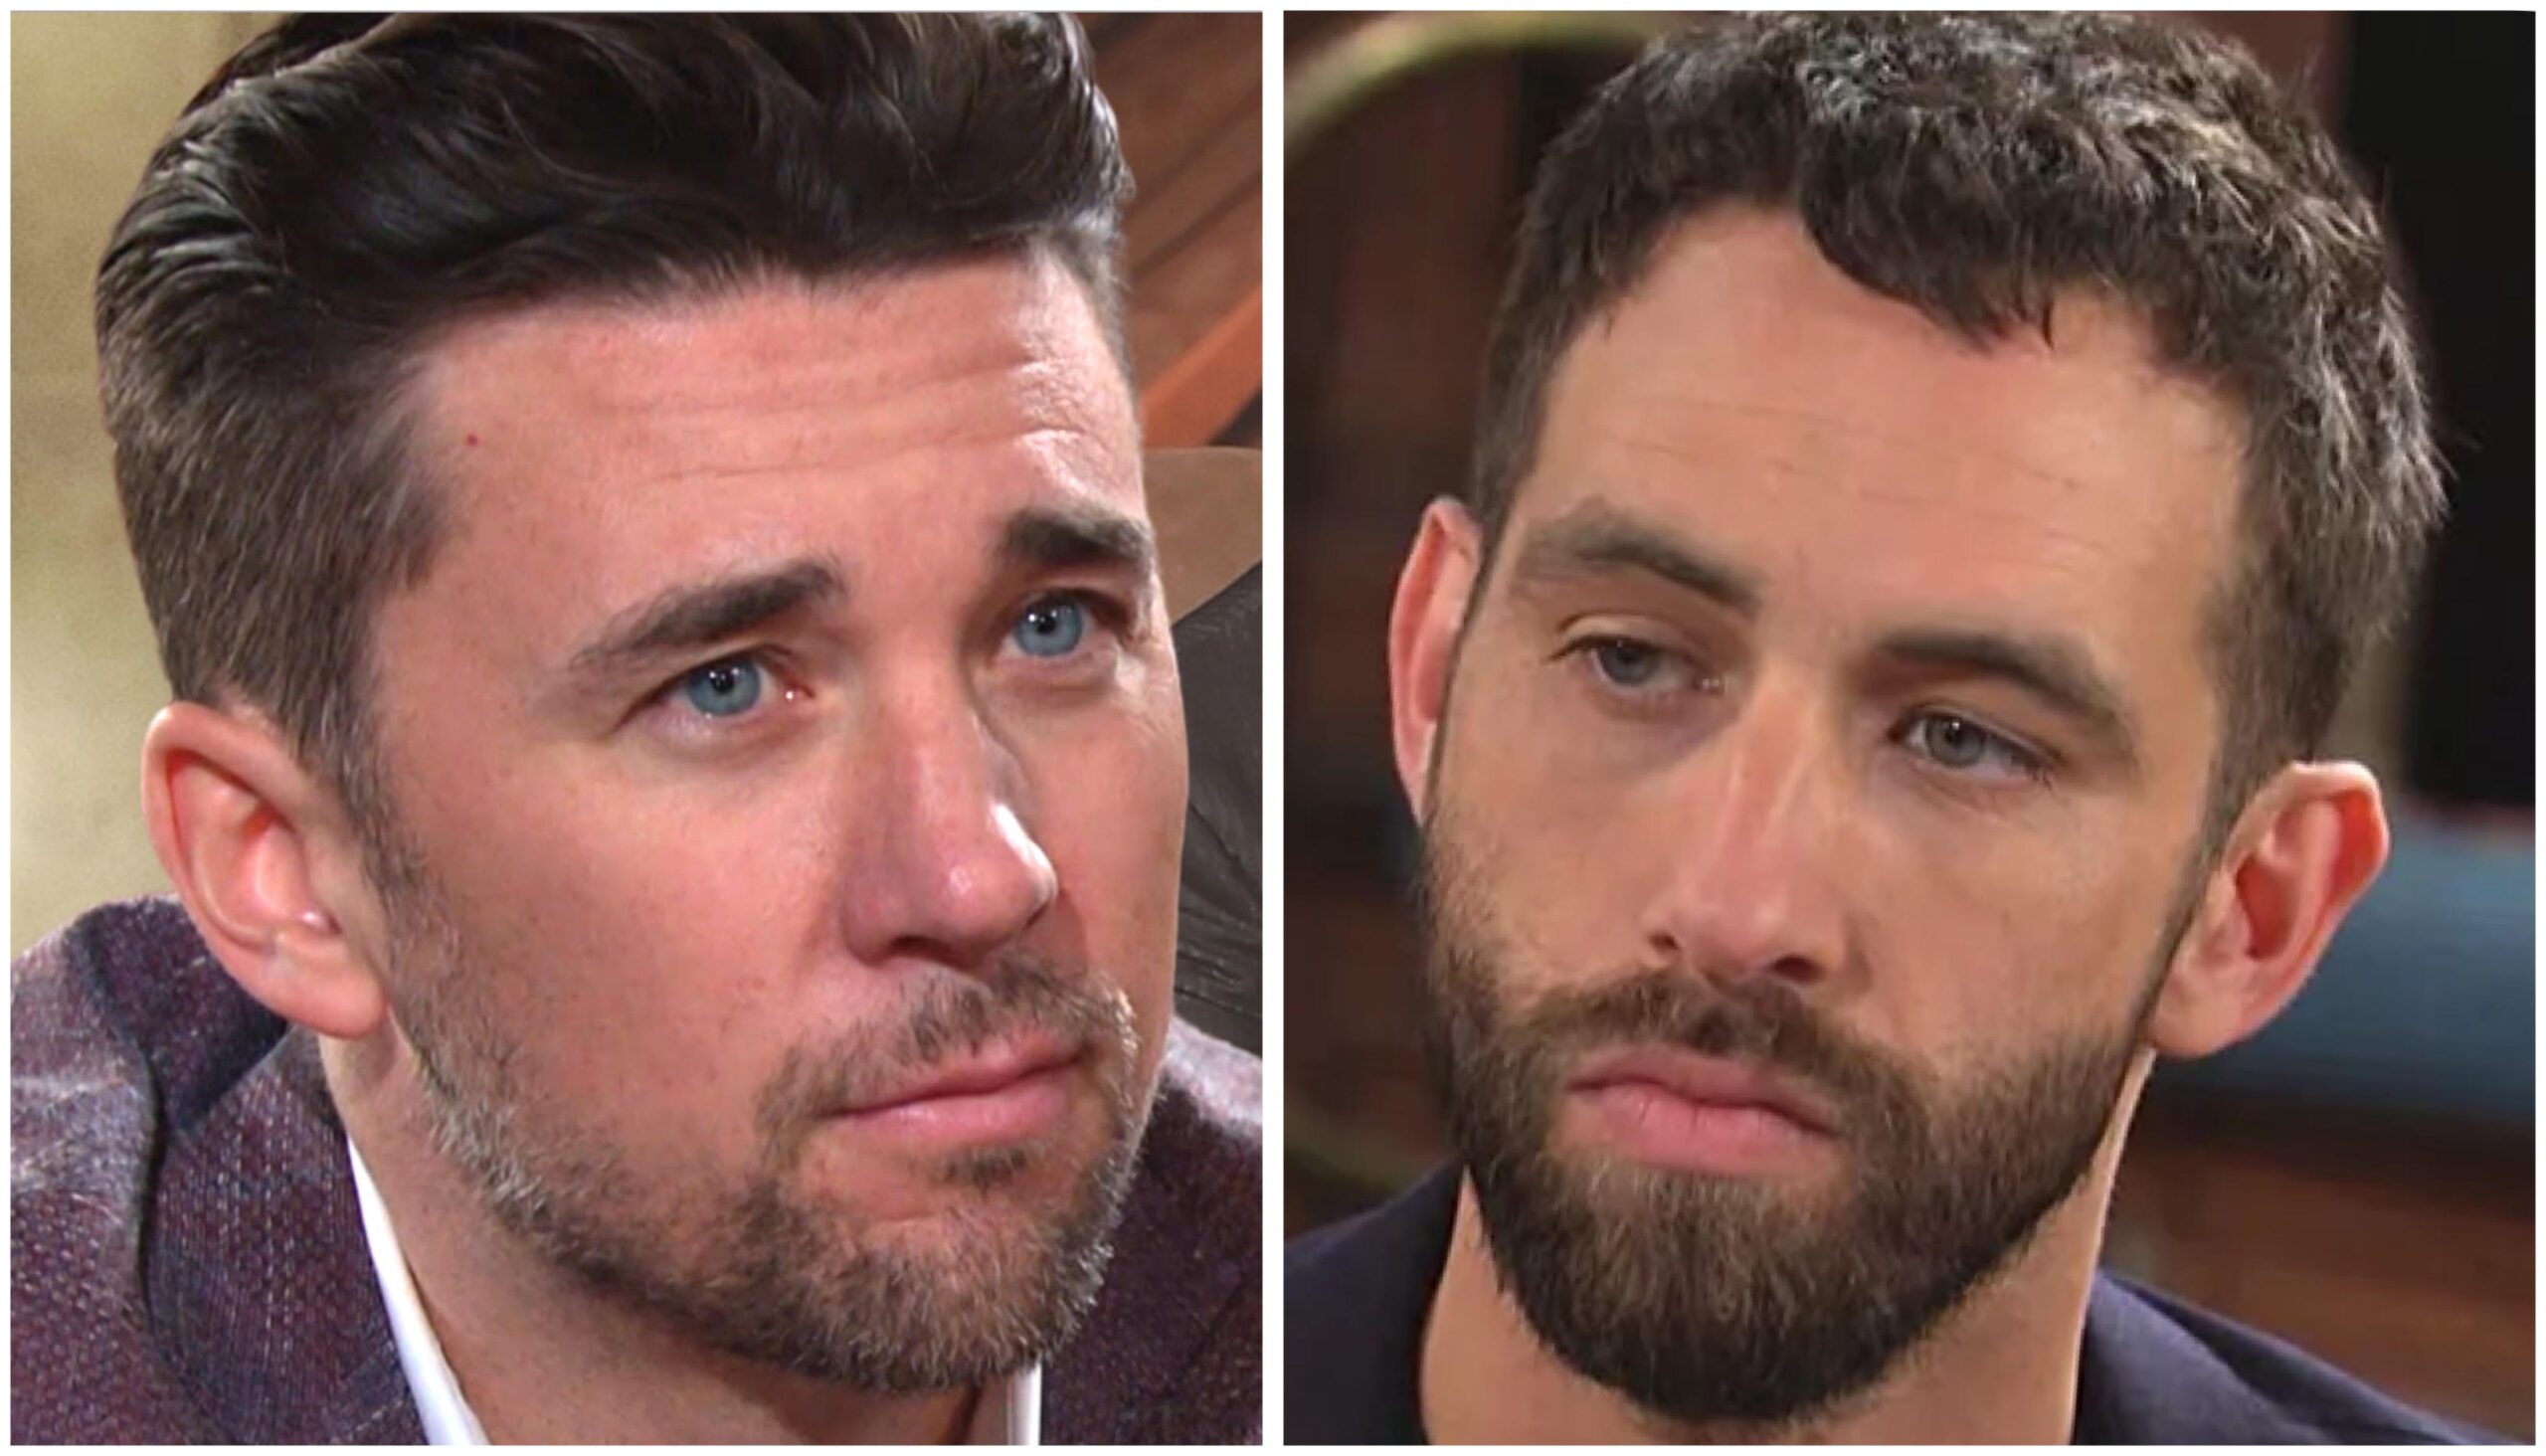 Days of Our Lives Spoilers Chad DiMera Everett Lynch